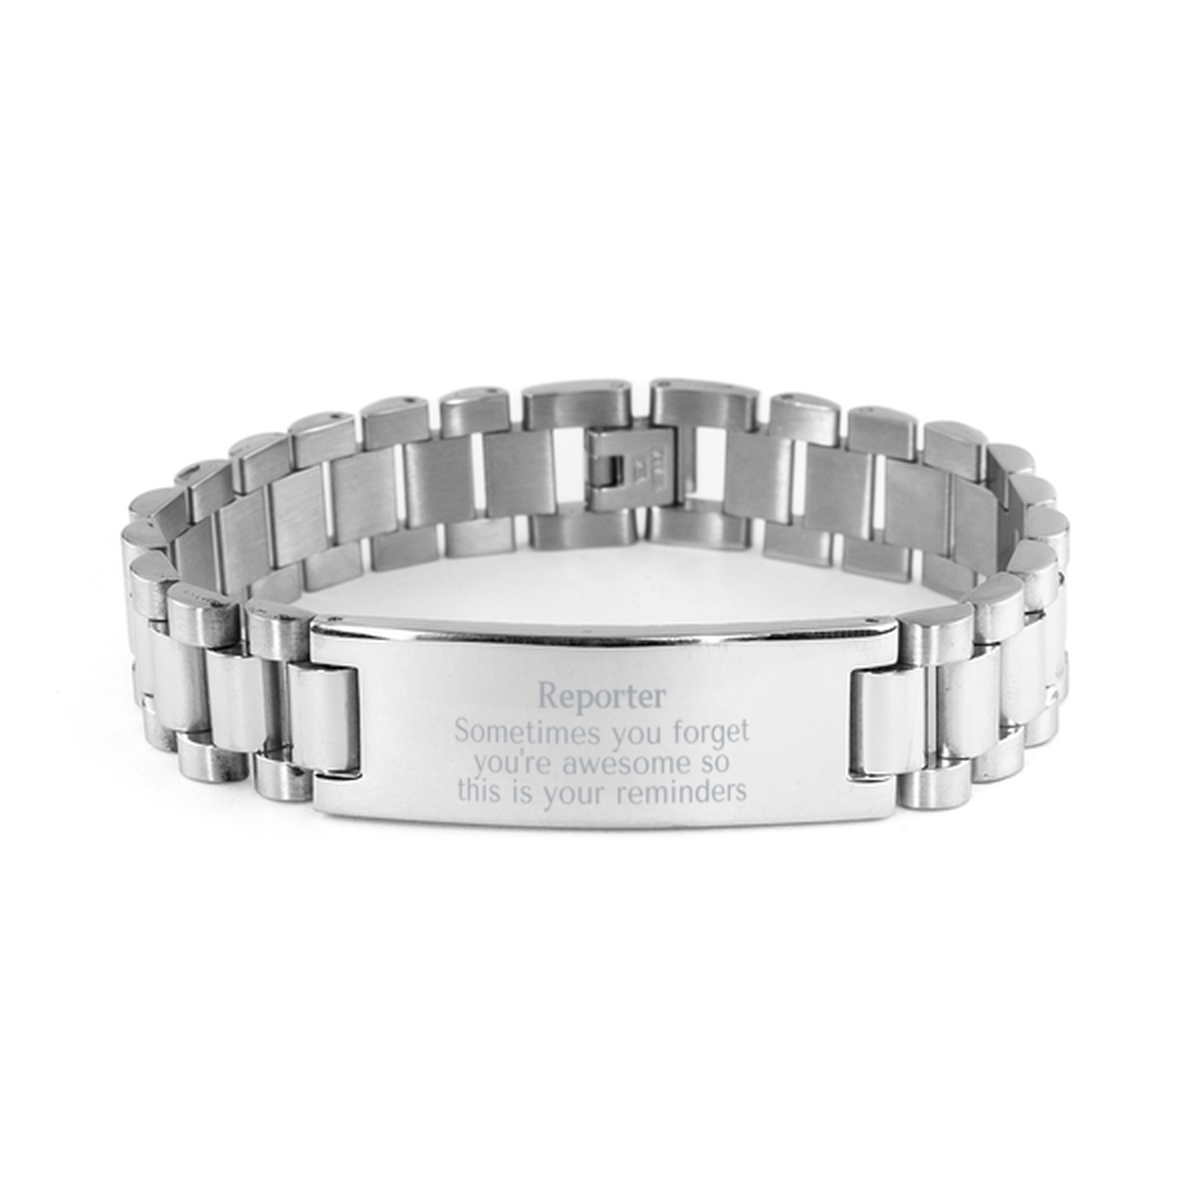 Sentimental Reporter Ladder Stainless Steel Bracelet, Reporter Sometimes you forget you're awesome so this is your reminders, Graduation Christmas Birthday Gifts for Reporter, Men, Women, Coworkers